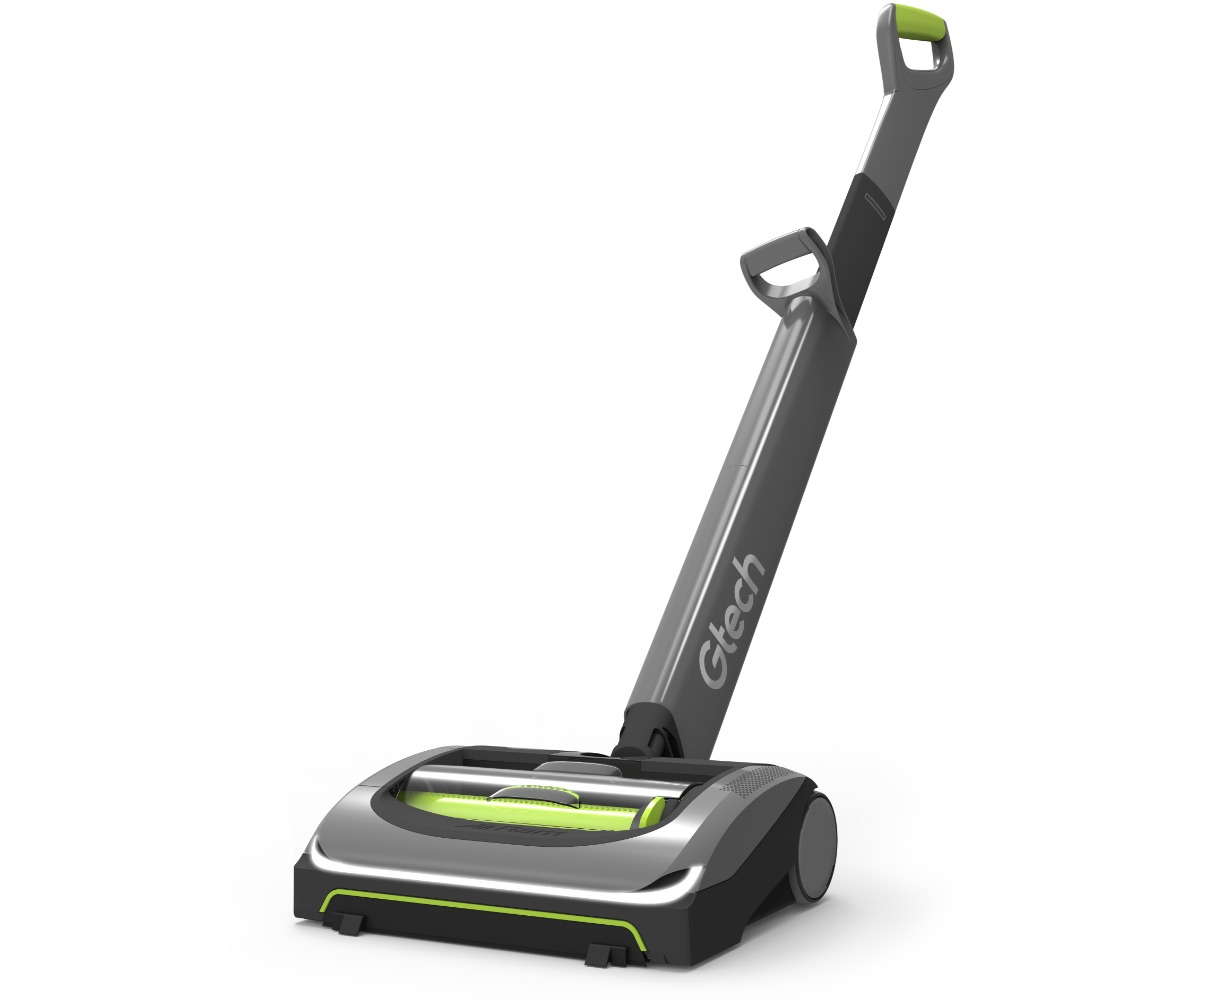 AirRAM MK2, Our Best-Selling Cordless Upright Vacuum